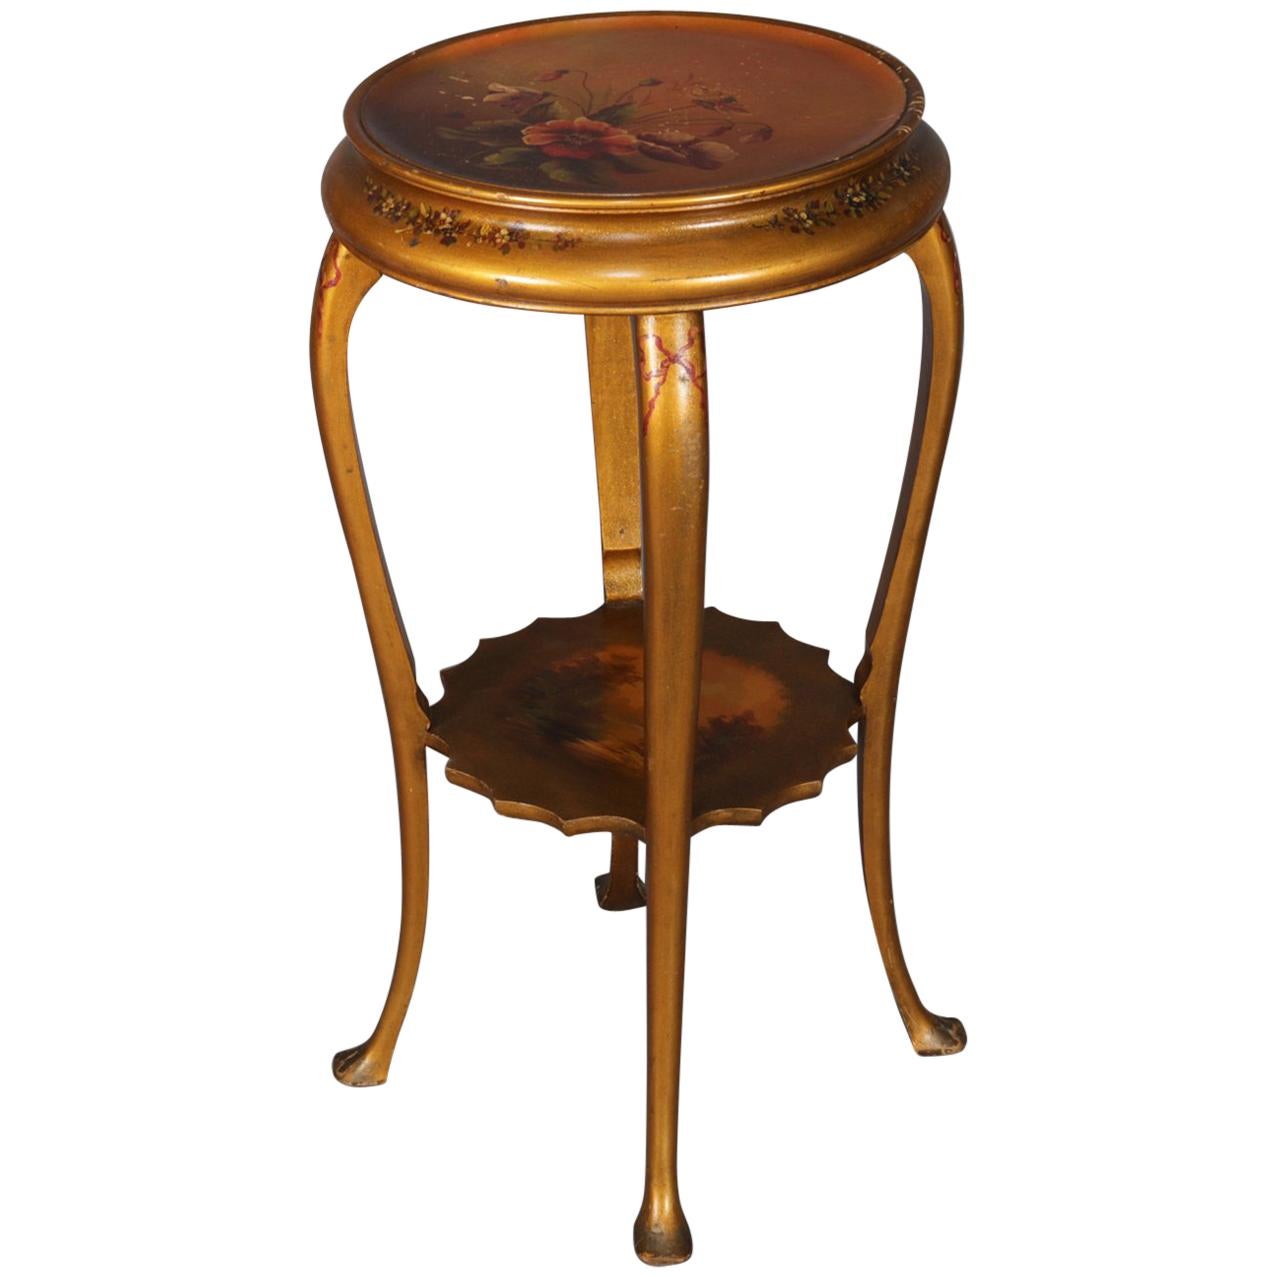 Vernis Martin Hand-Painted Landscape and Floral Giltwood Plant Stand, circa 1900